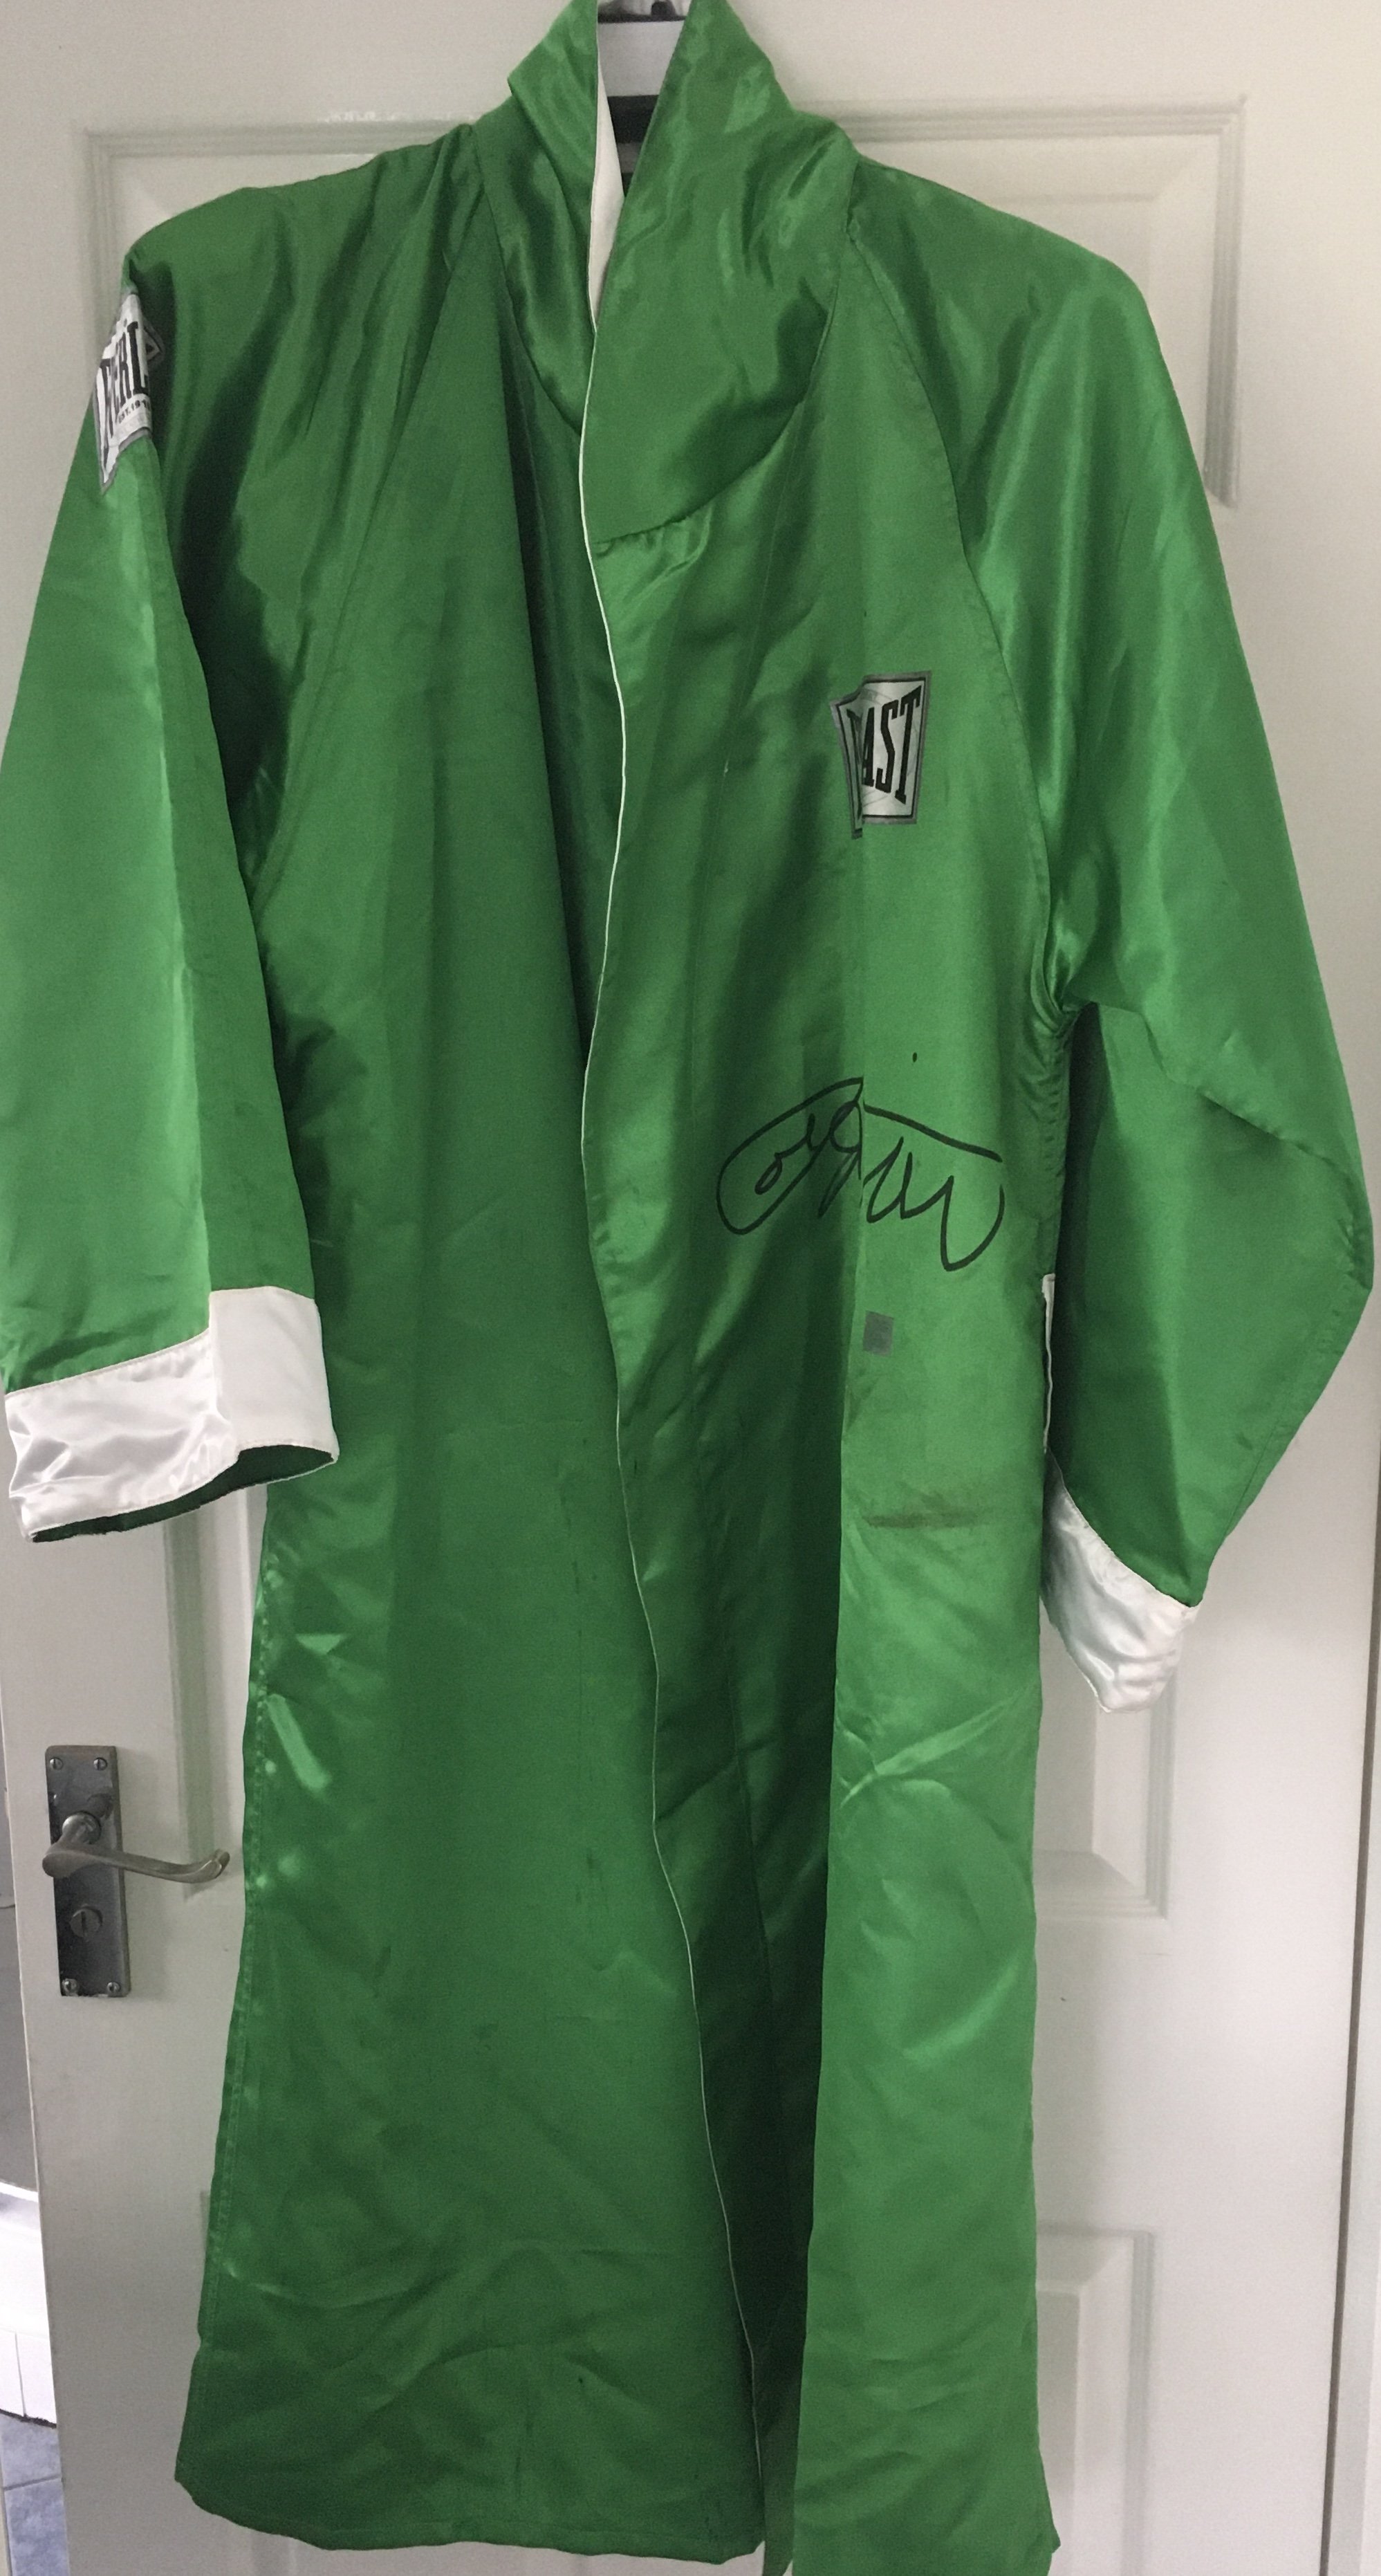 Joe Frazier Signed Boxing Gown: Everlast green lar - Image 4 of 4